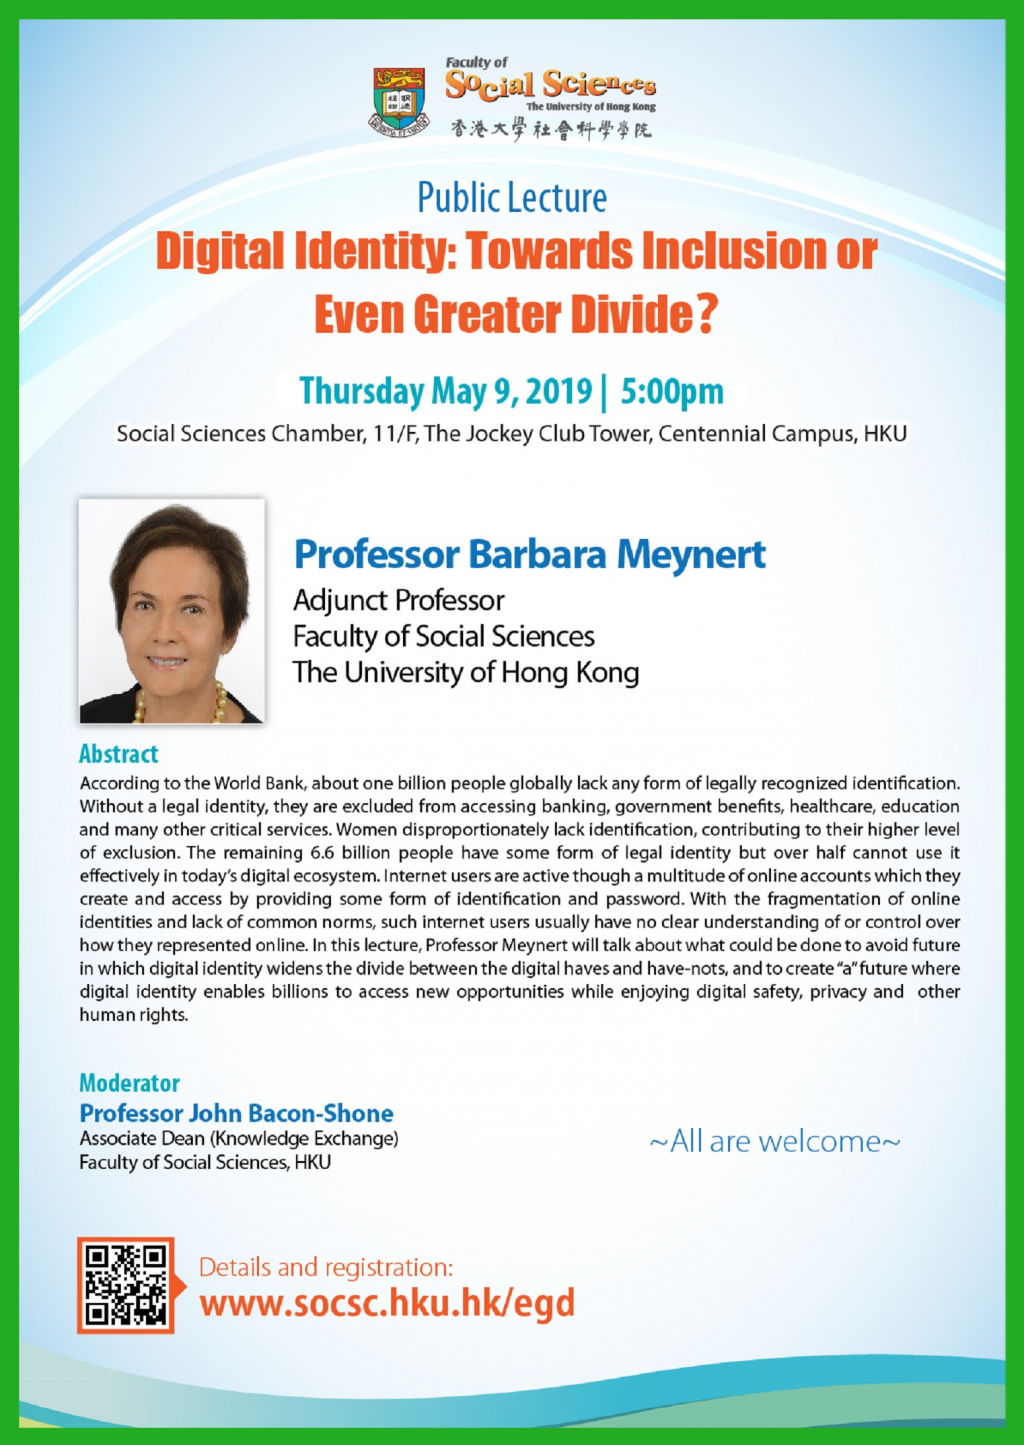 Public Lecture on Digital Identity: Towards Inclusion or Even Greater Divide?